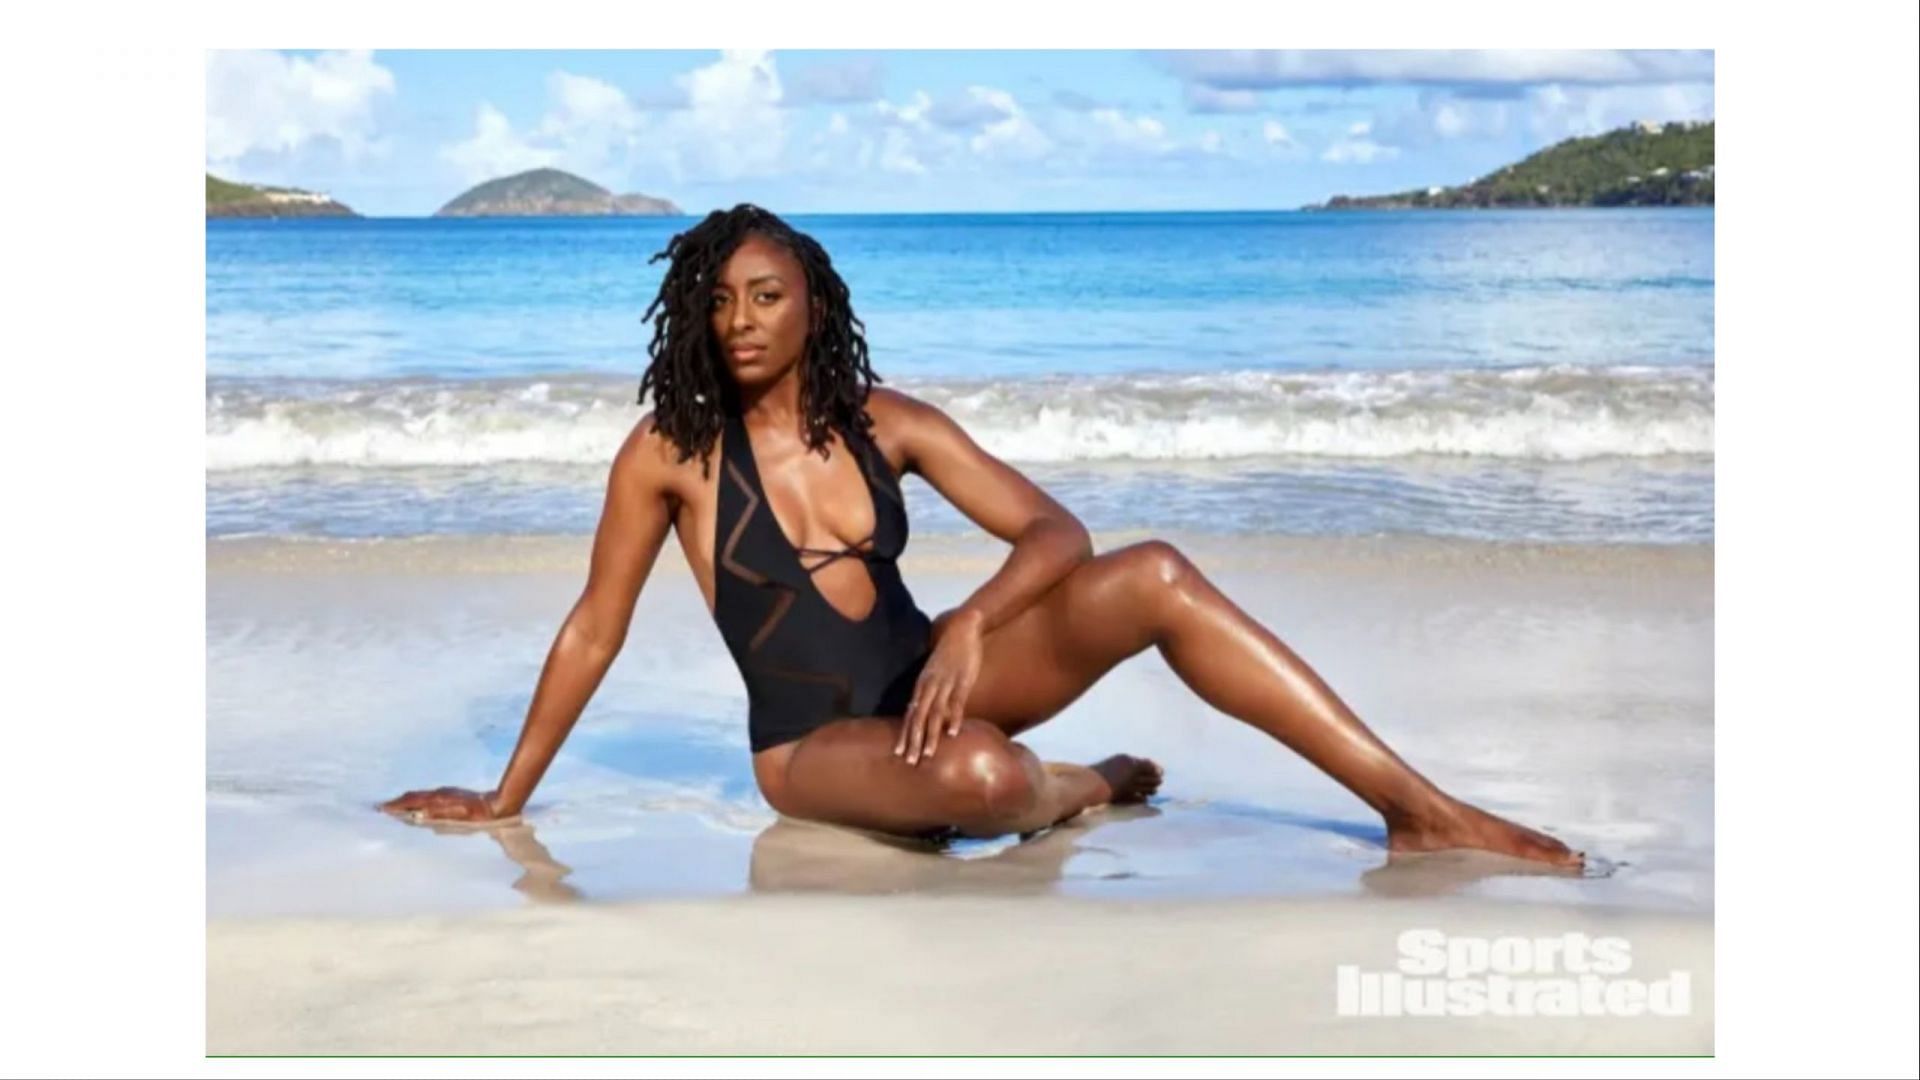 Los Angeles Sparks&#039; Nneka Ogwumike - Picture #2 taken by Laretta Houston/Sports Illustrated